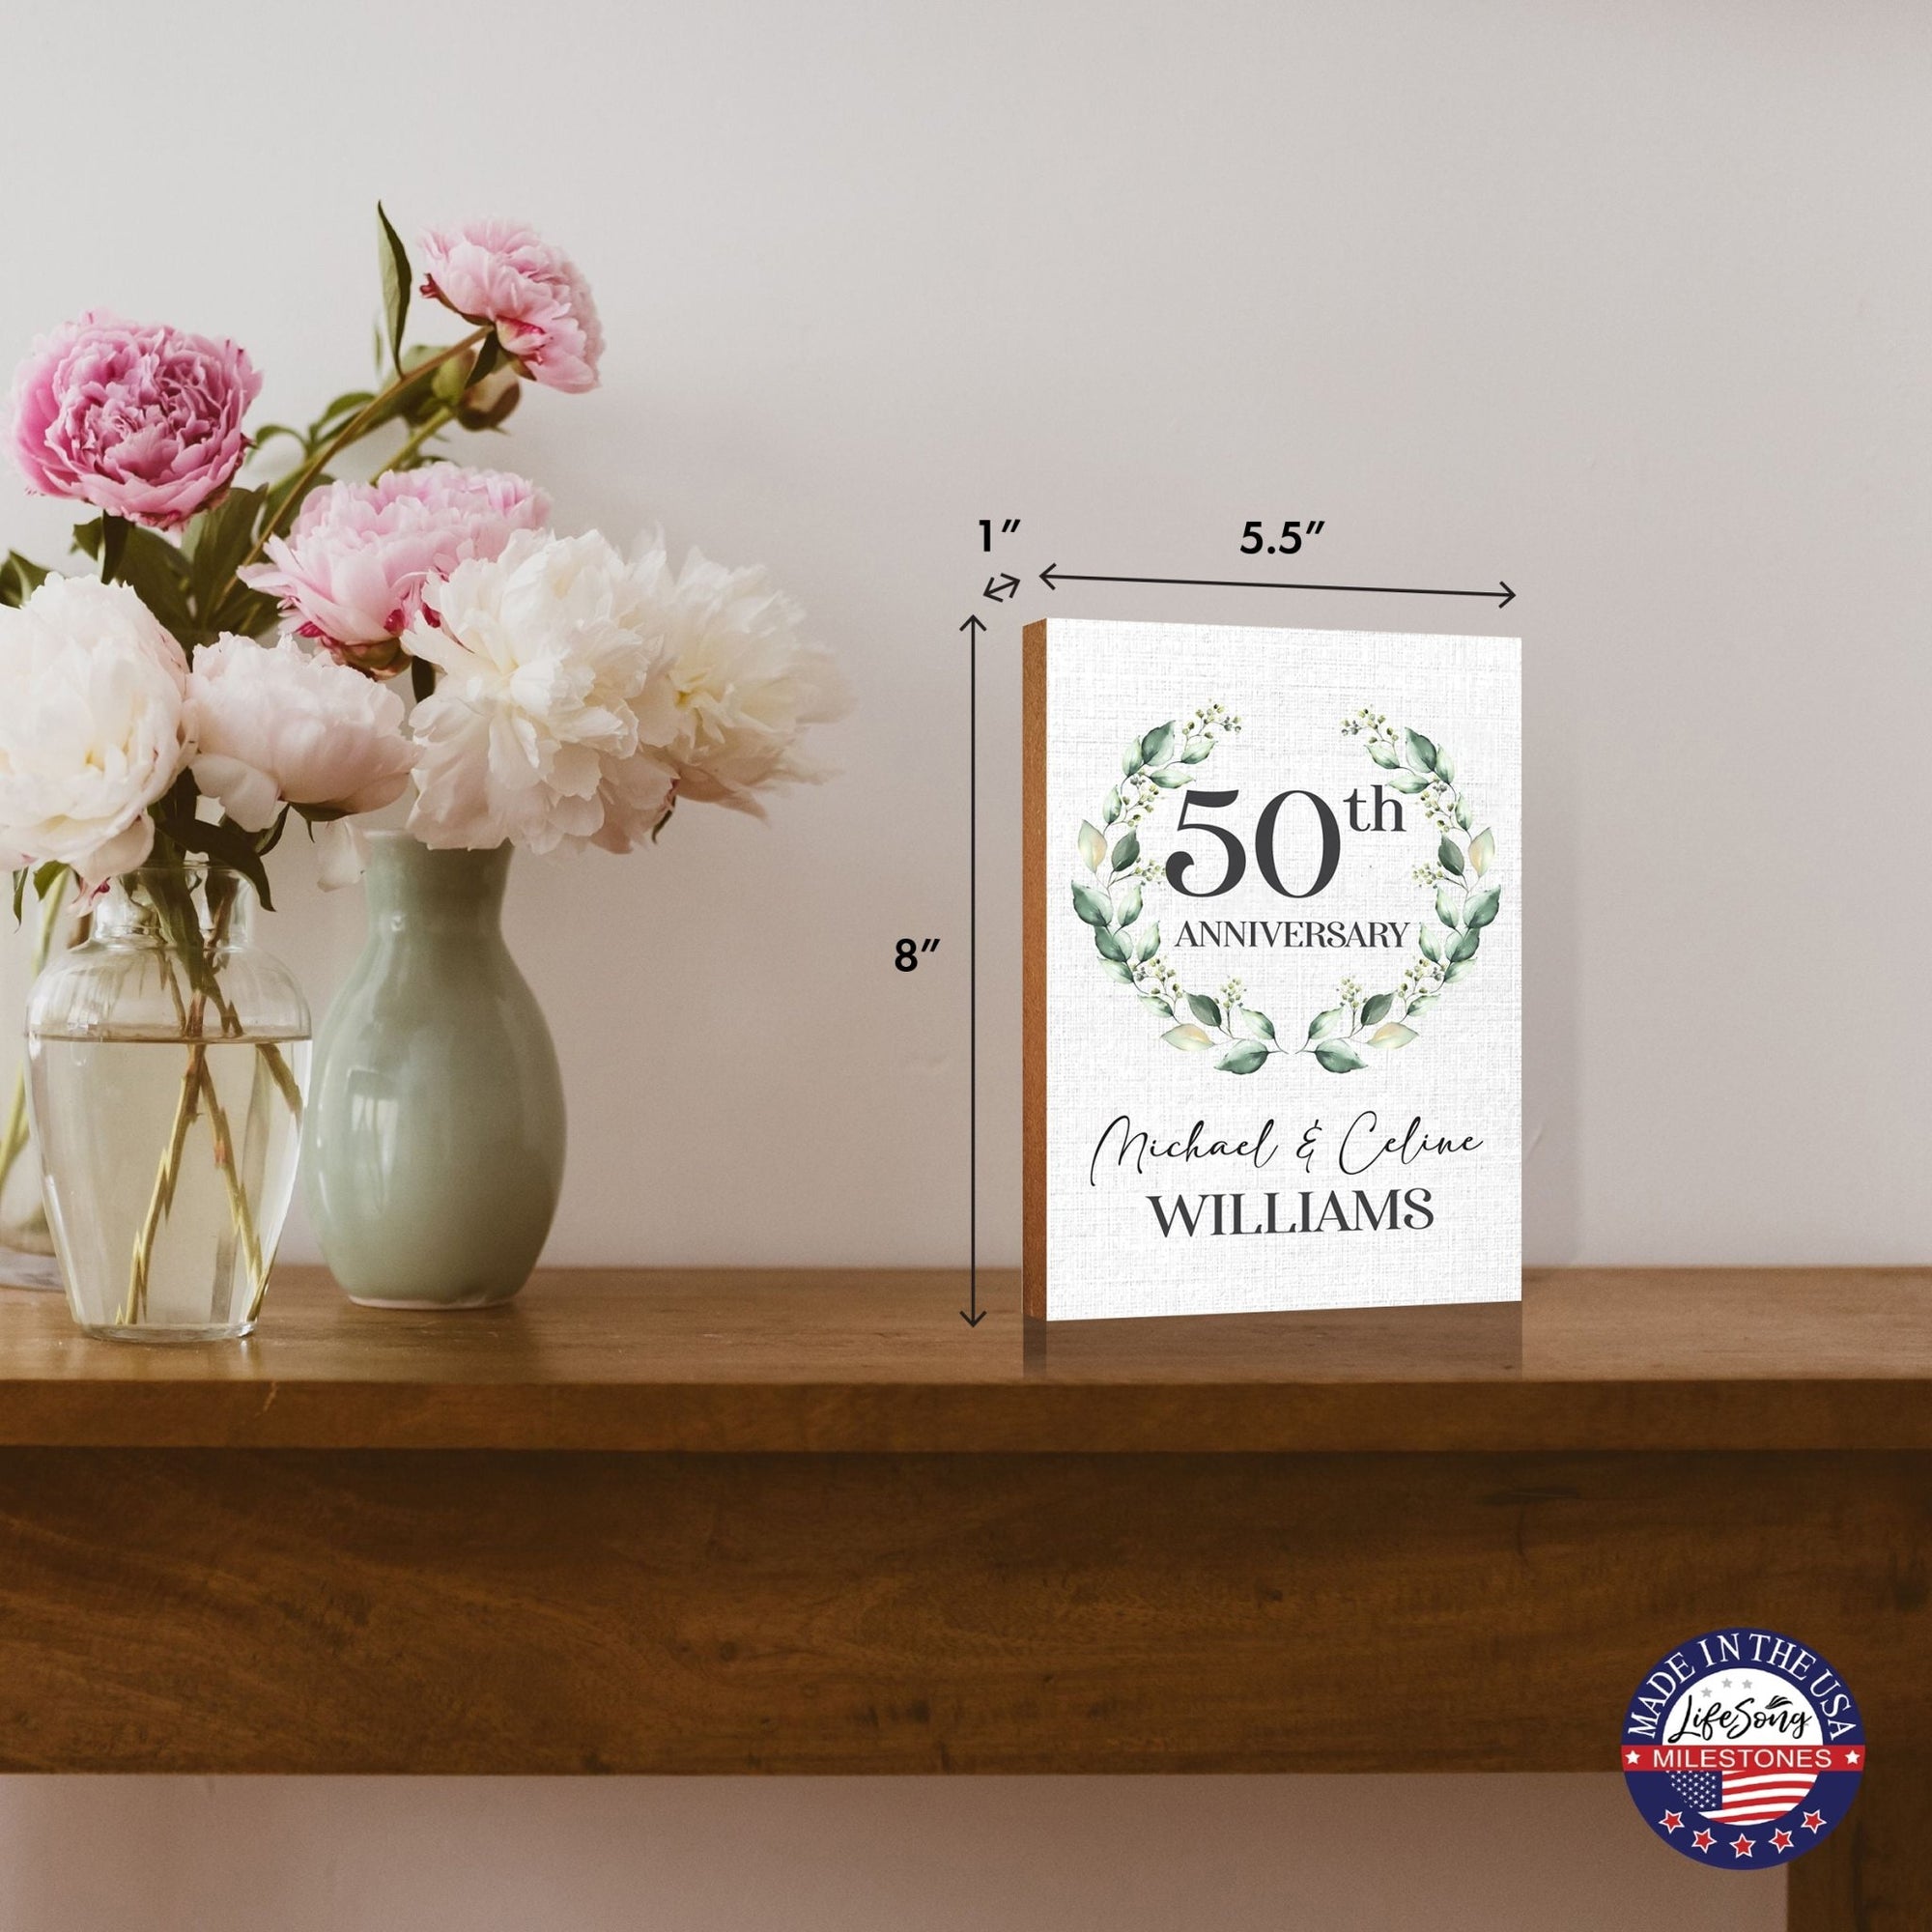 Personalized 50th Wedding Anniversary Wooden Shelf Décor and Tabletop Signs Gifts for Couples - LifeSong Milestones